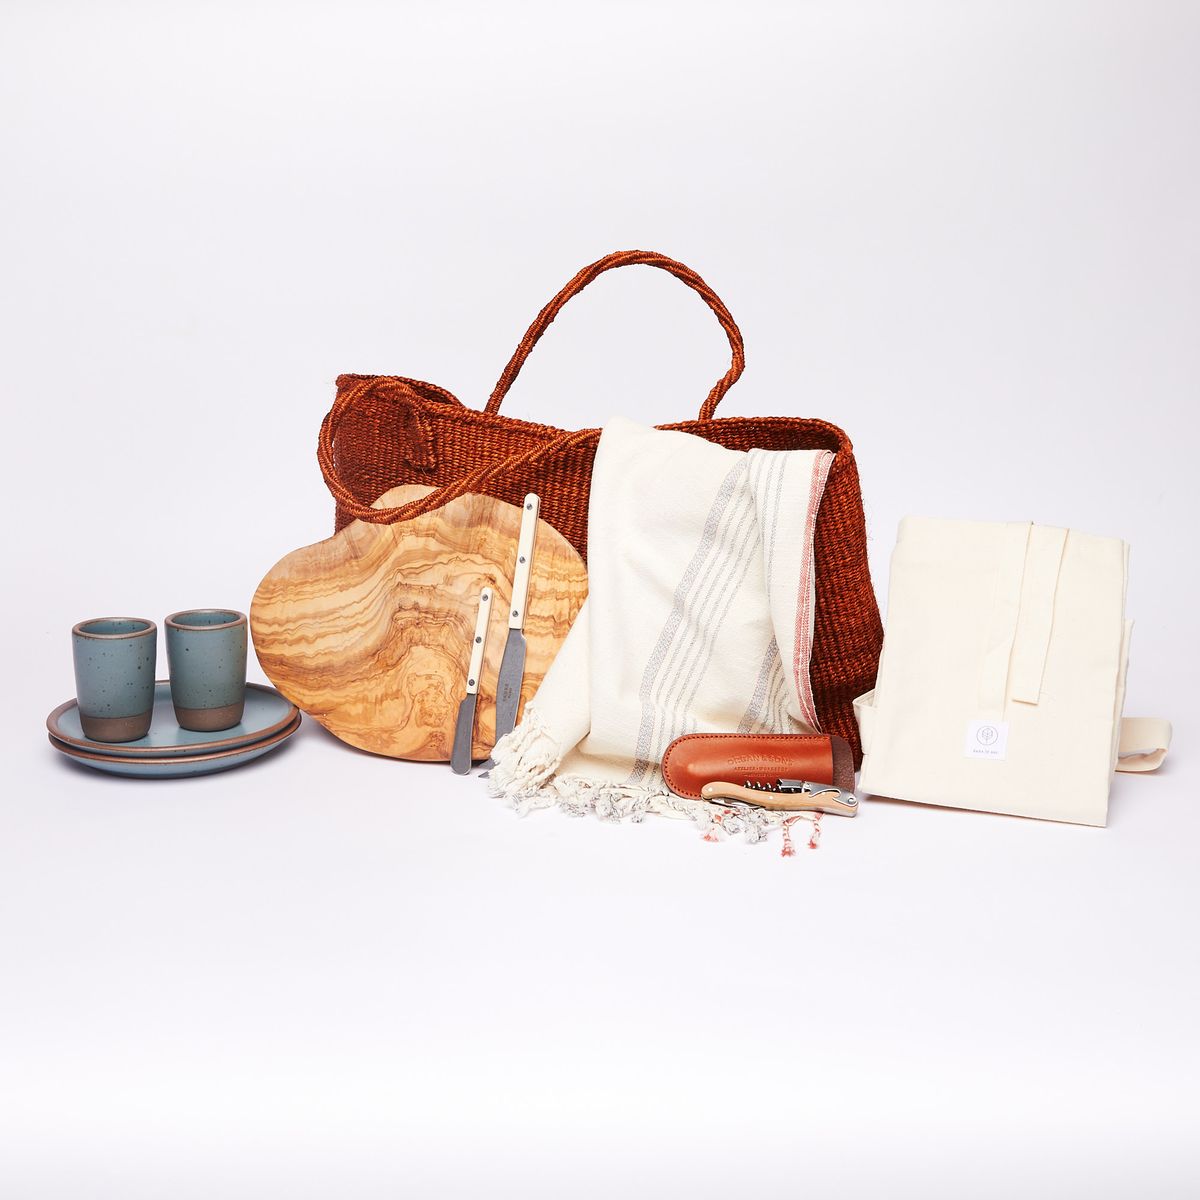 From left to right: Two turquoise juice cups on two turquoise side plates, an rounded olivewood cutting board, a large rust-colored woven tote, two cheese spreader, a striped turkish towel, a wine key with leather sheath, a folded cotton baguette bag